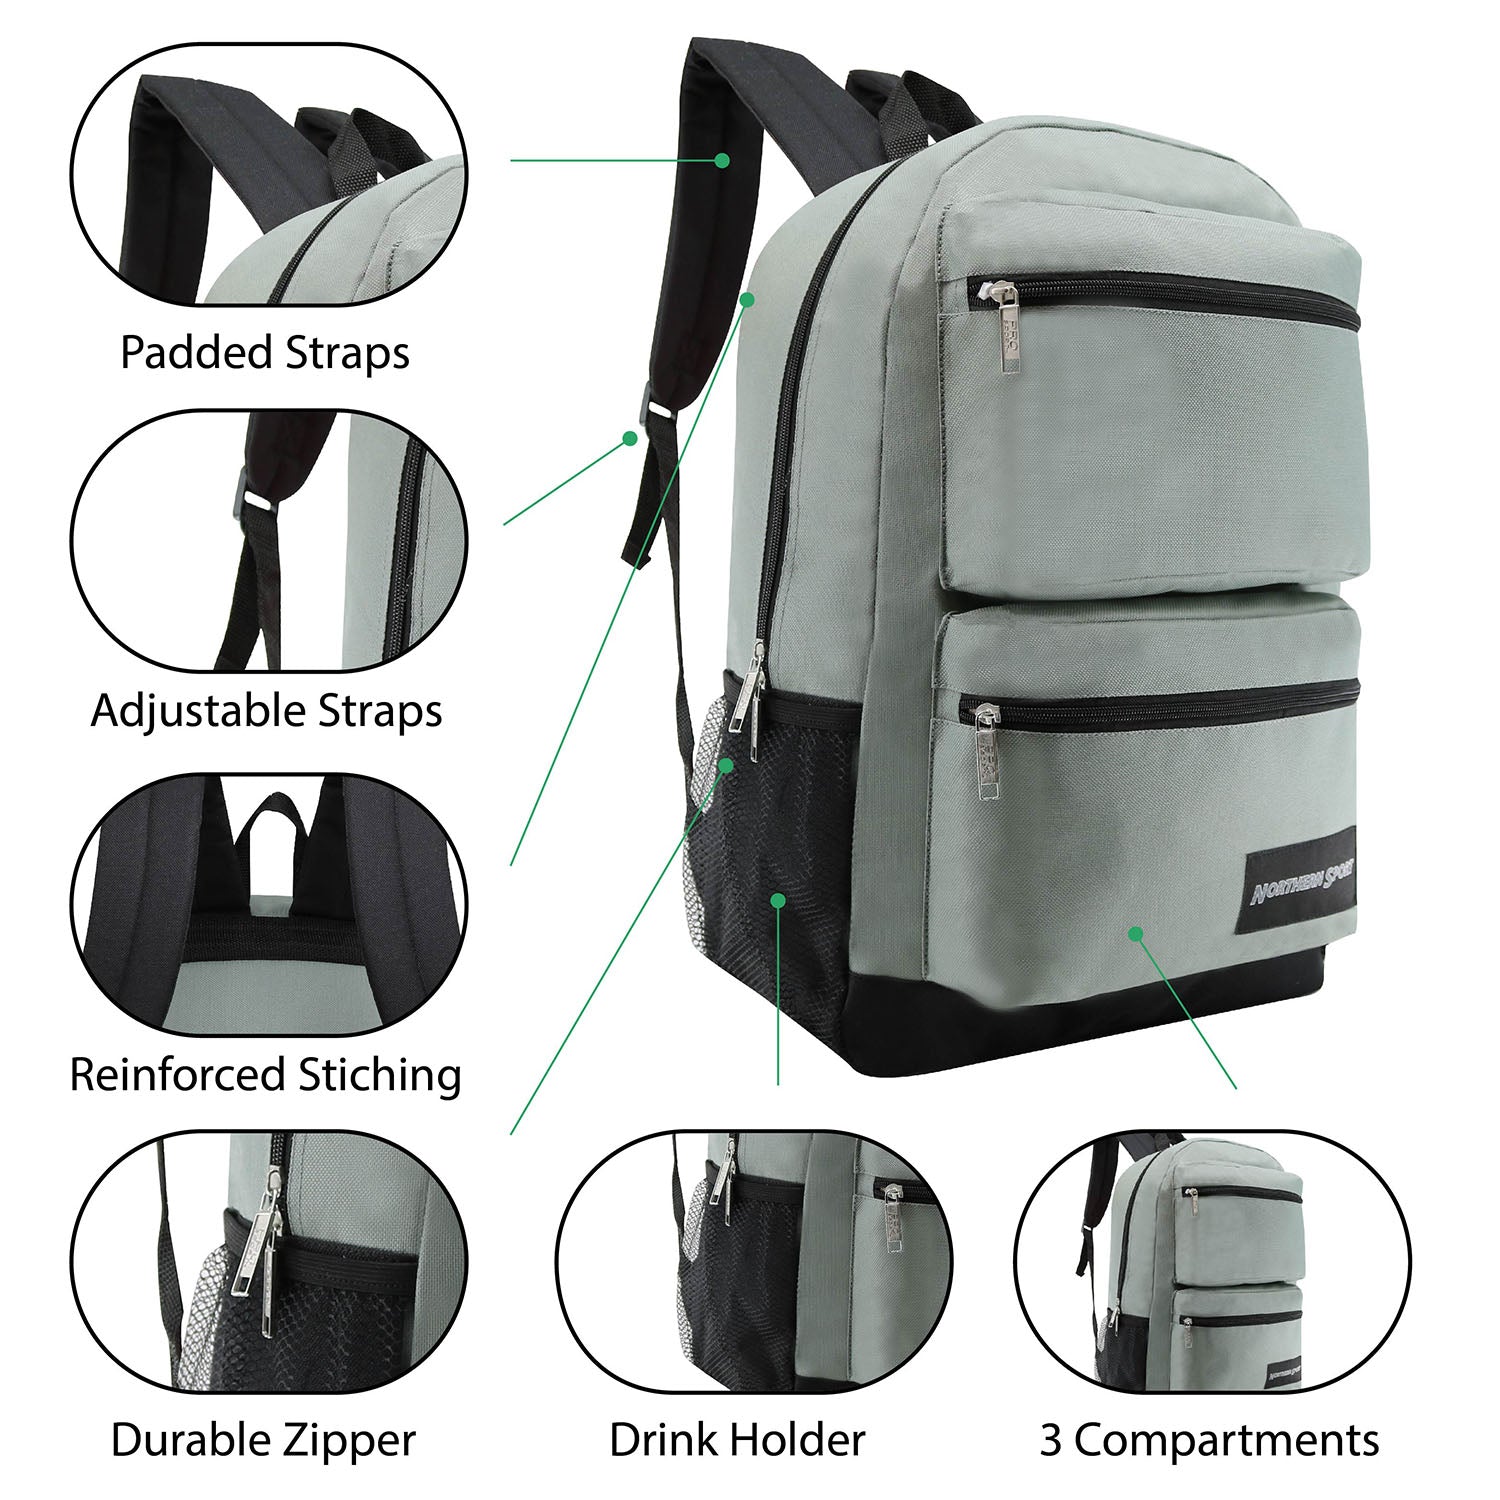 Bulk Case of 12 19" Backpacks and 12 Hygiene & Toiletries Kit - Wholesale Care Package - Disaster Relief Kit, Homeless, Charity